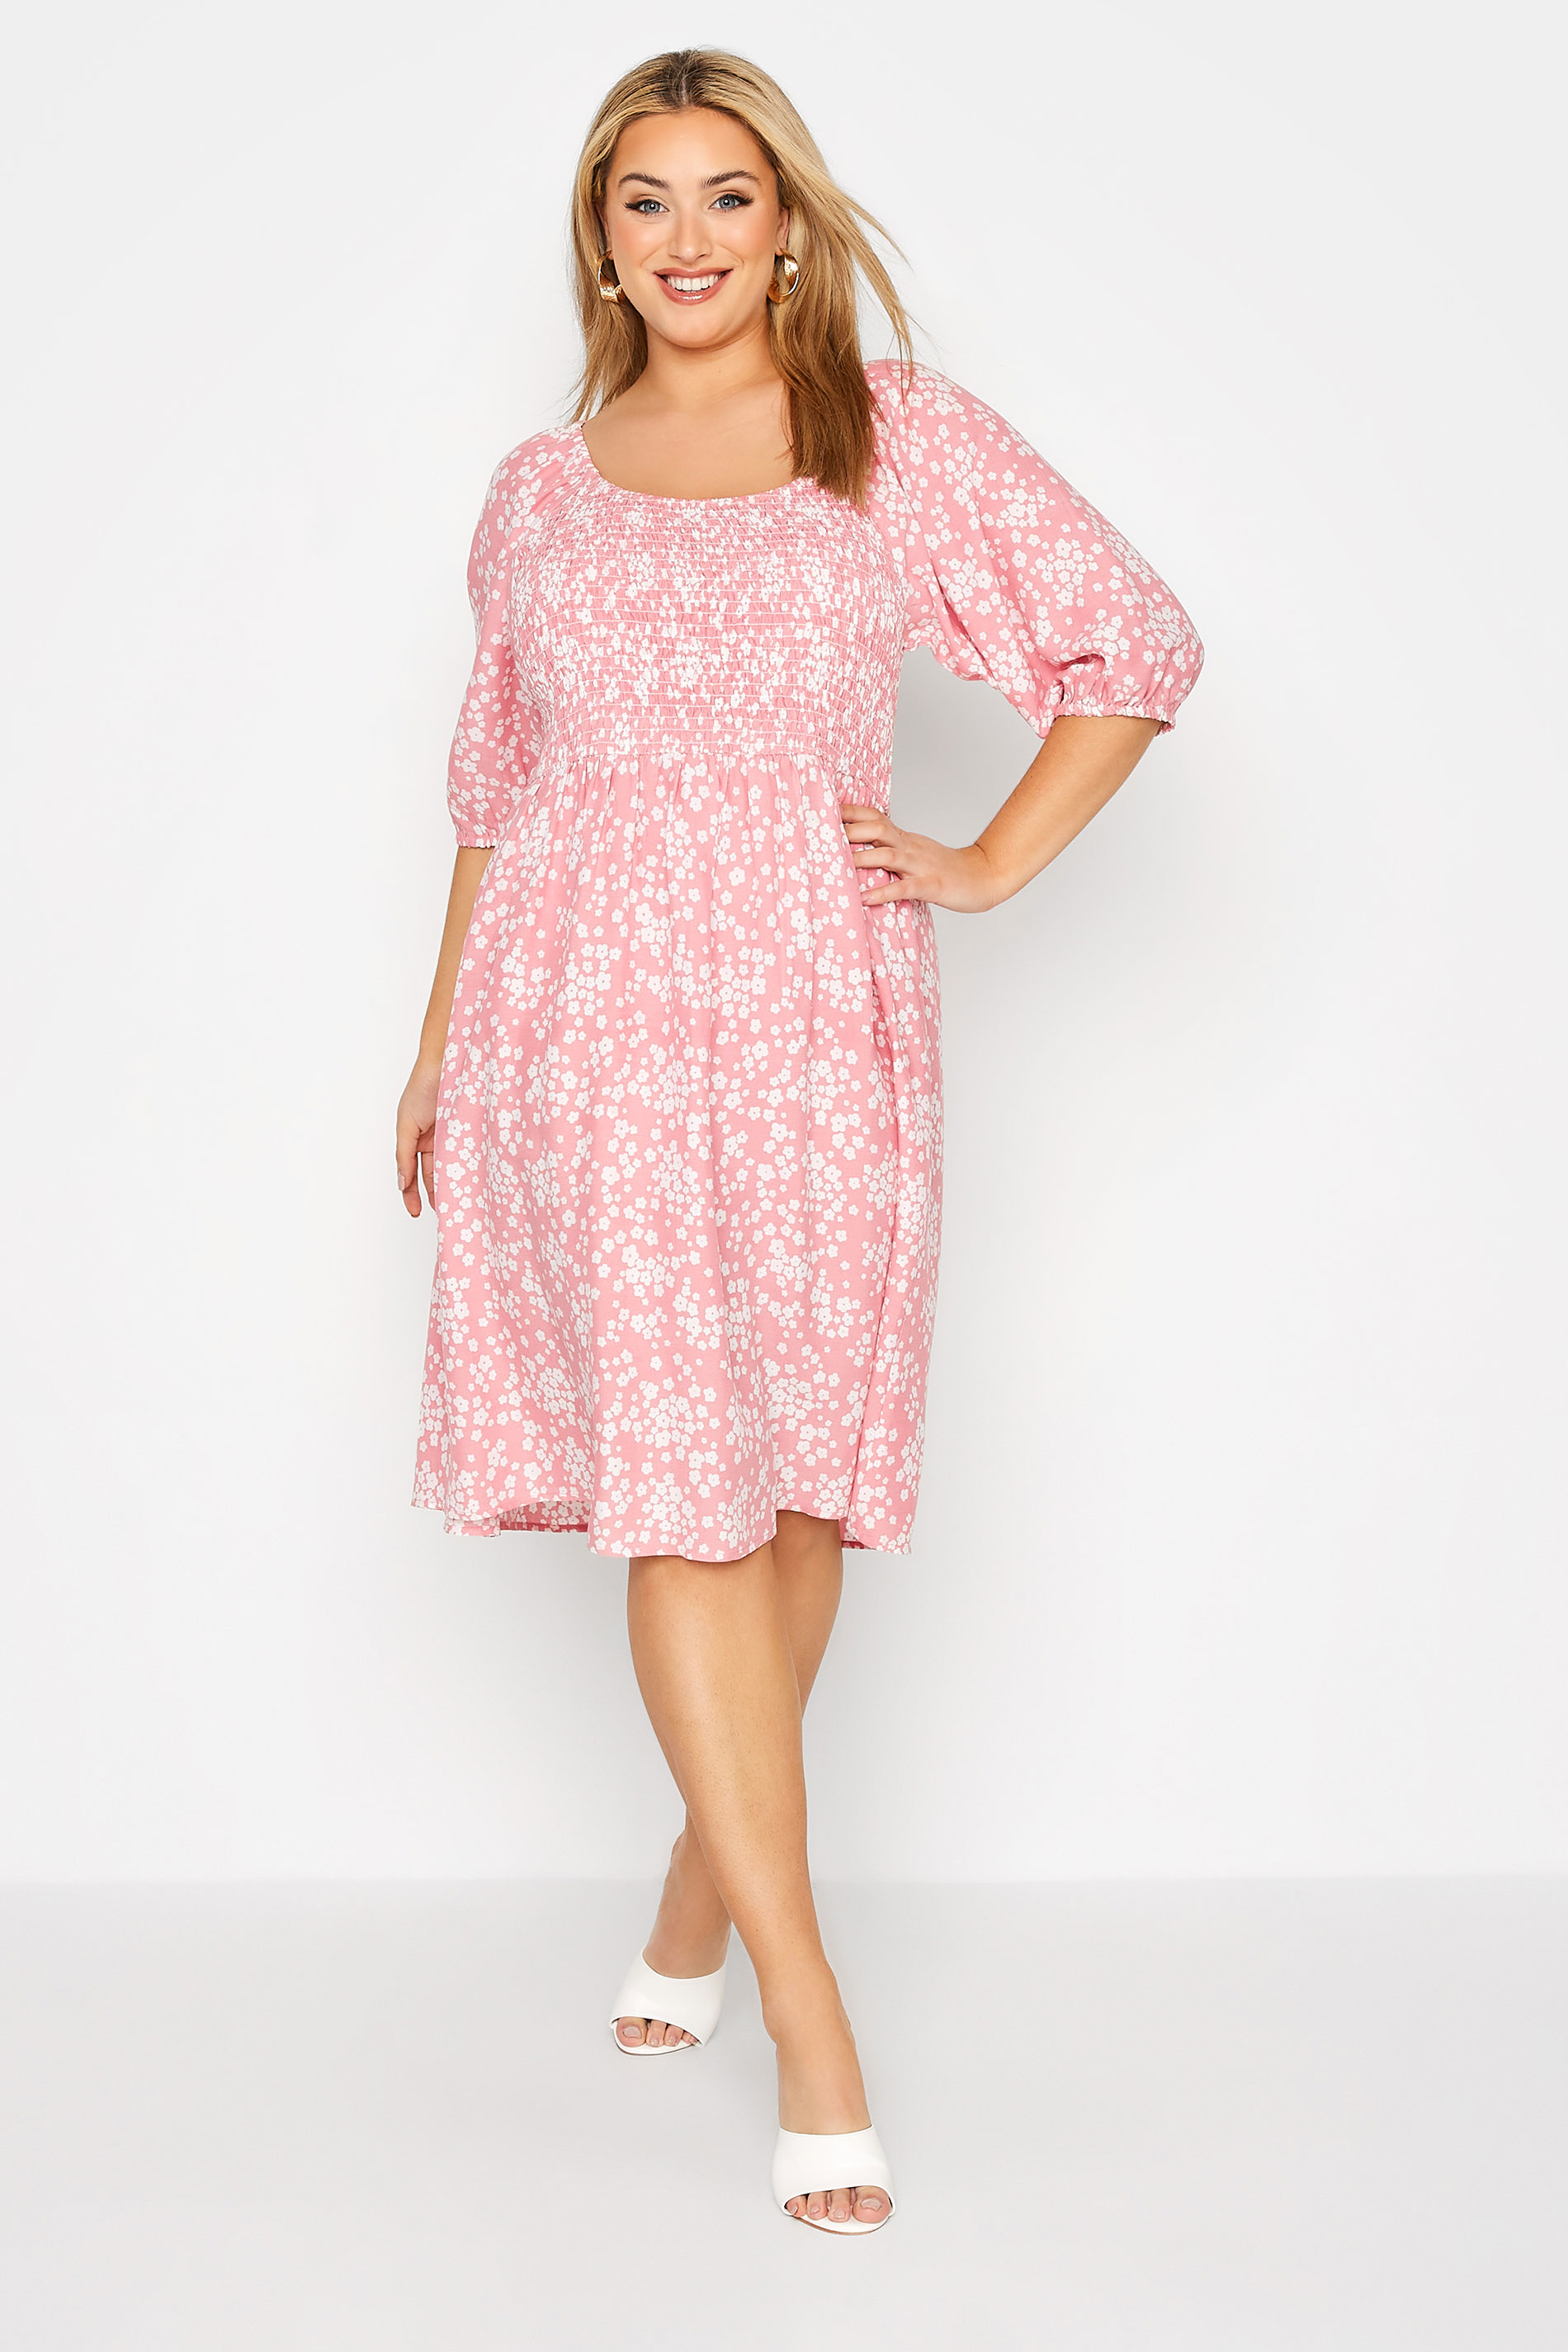 Robes Grande Taille Grande taille  Robes Mi-Longue | Robe Rose & Blanche Floral Manches en Ballons - QP98579